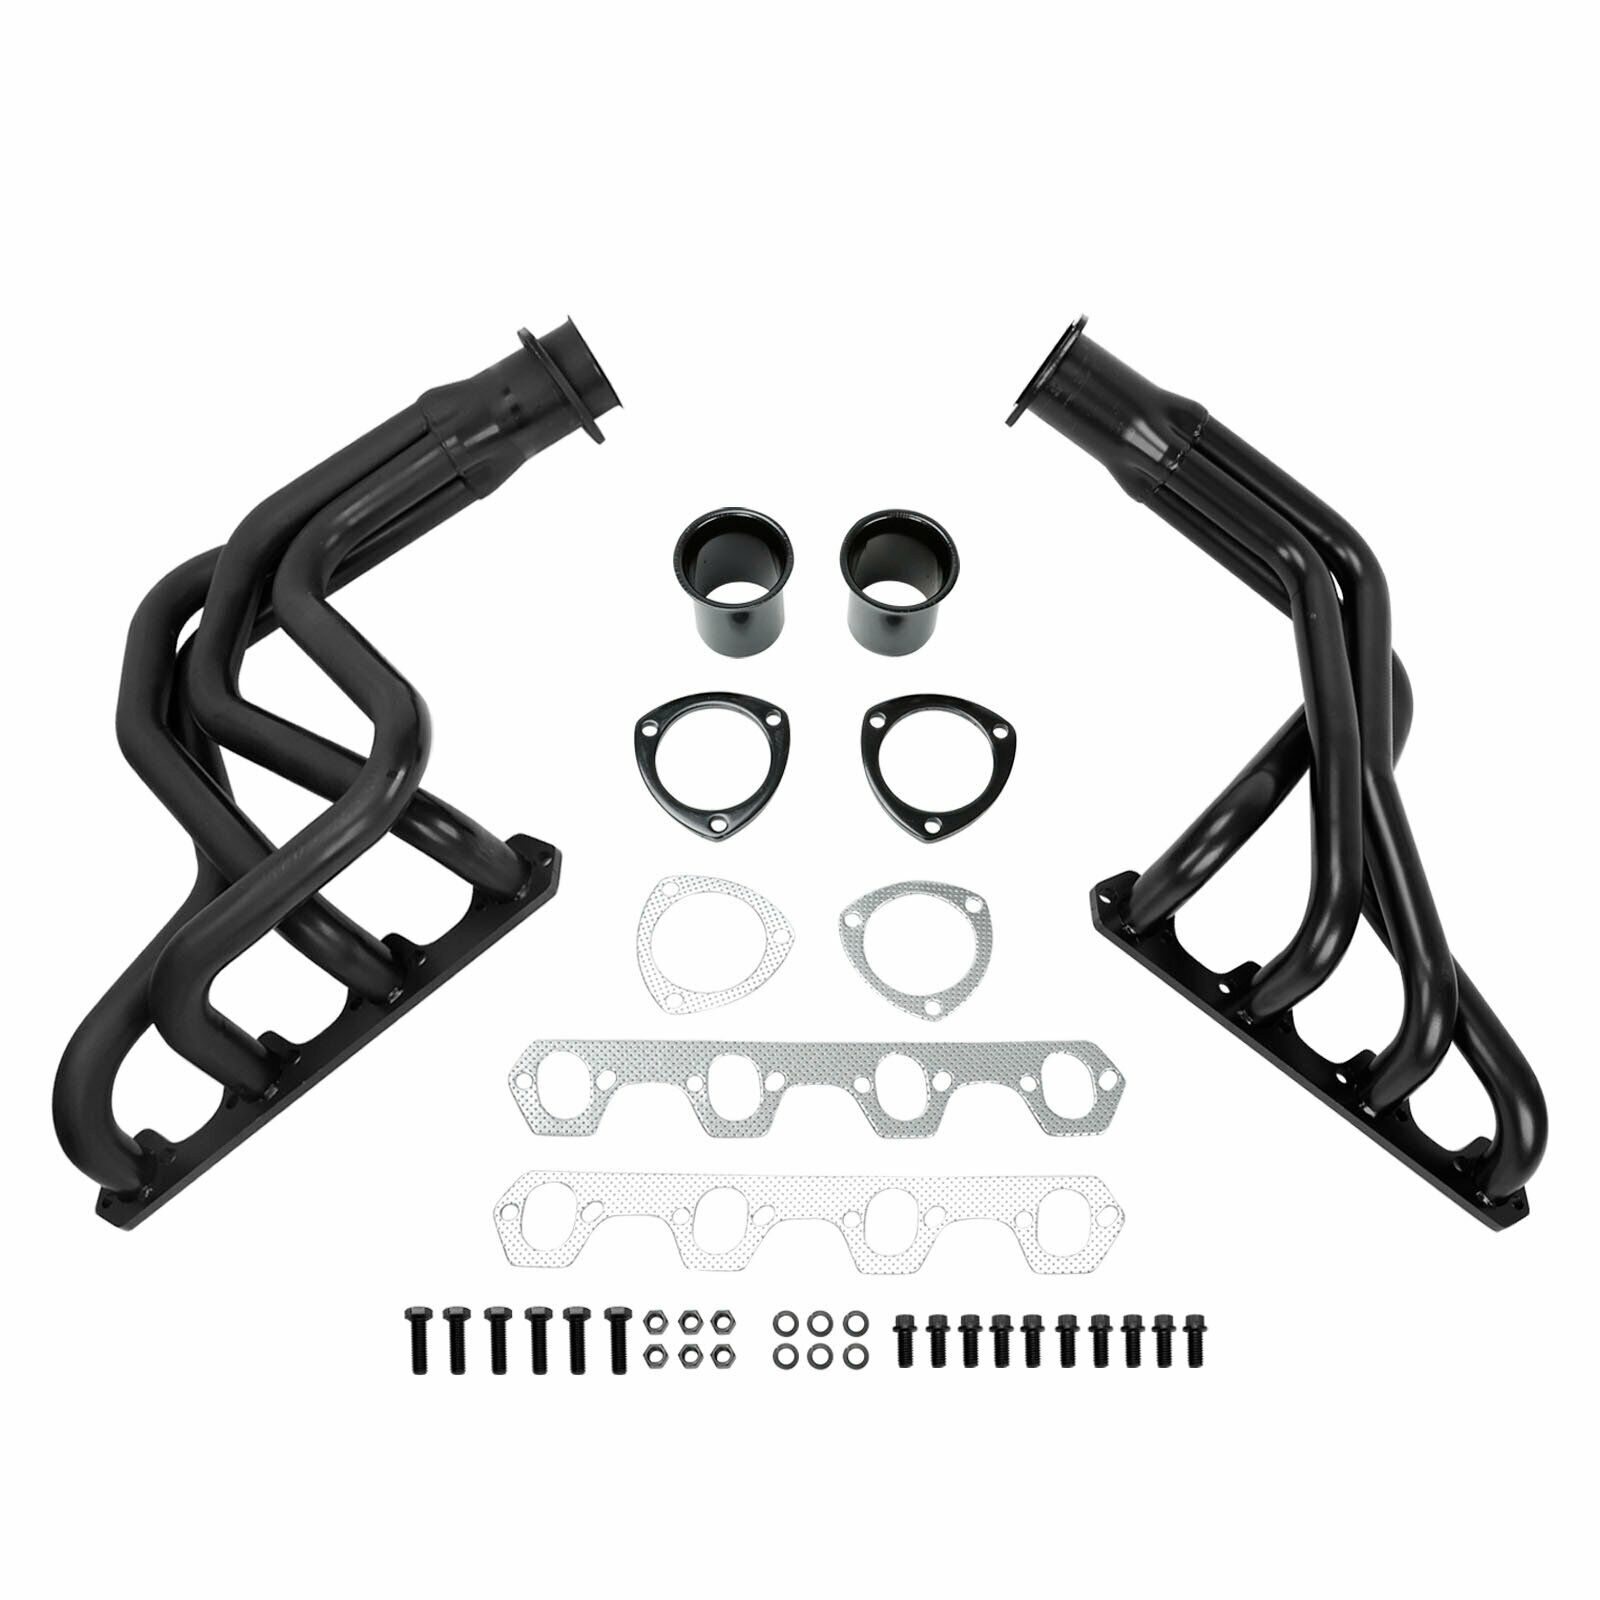 Exhaust Headers Kit For 69-79 Ford F-100 F100 5.0L V8 302W Pickup Truck 2W New